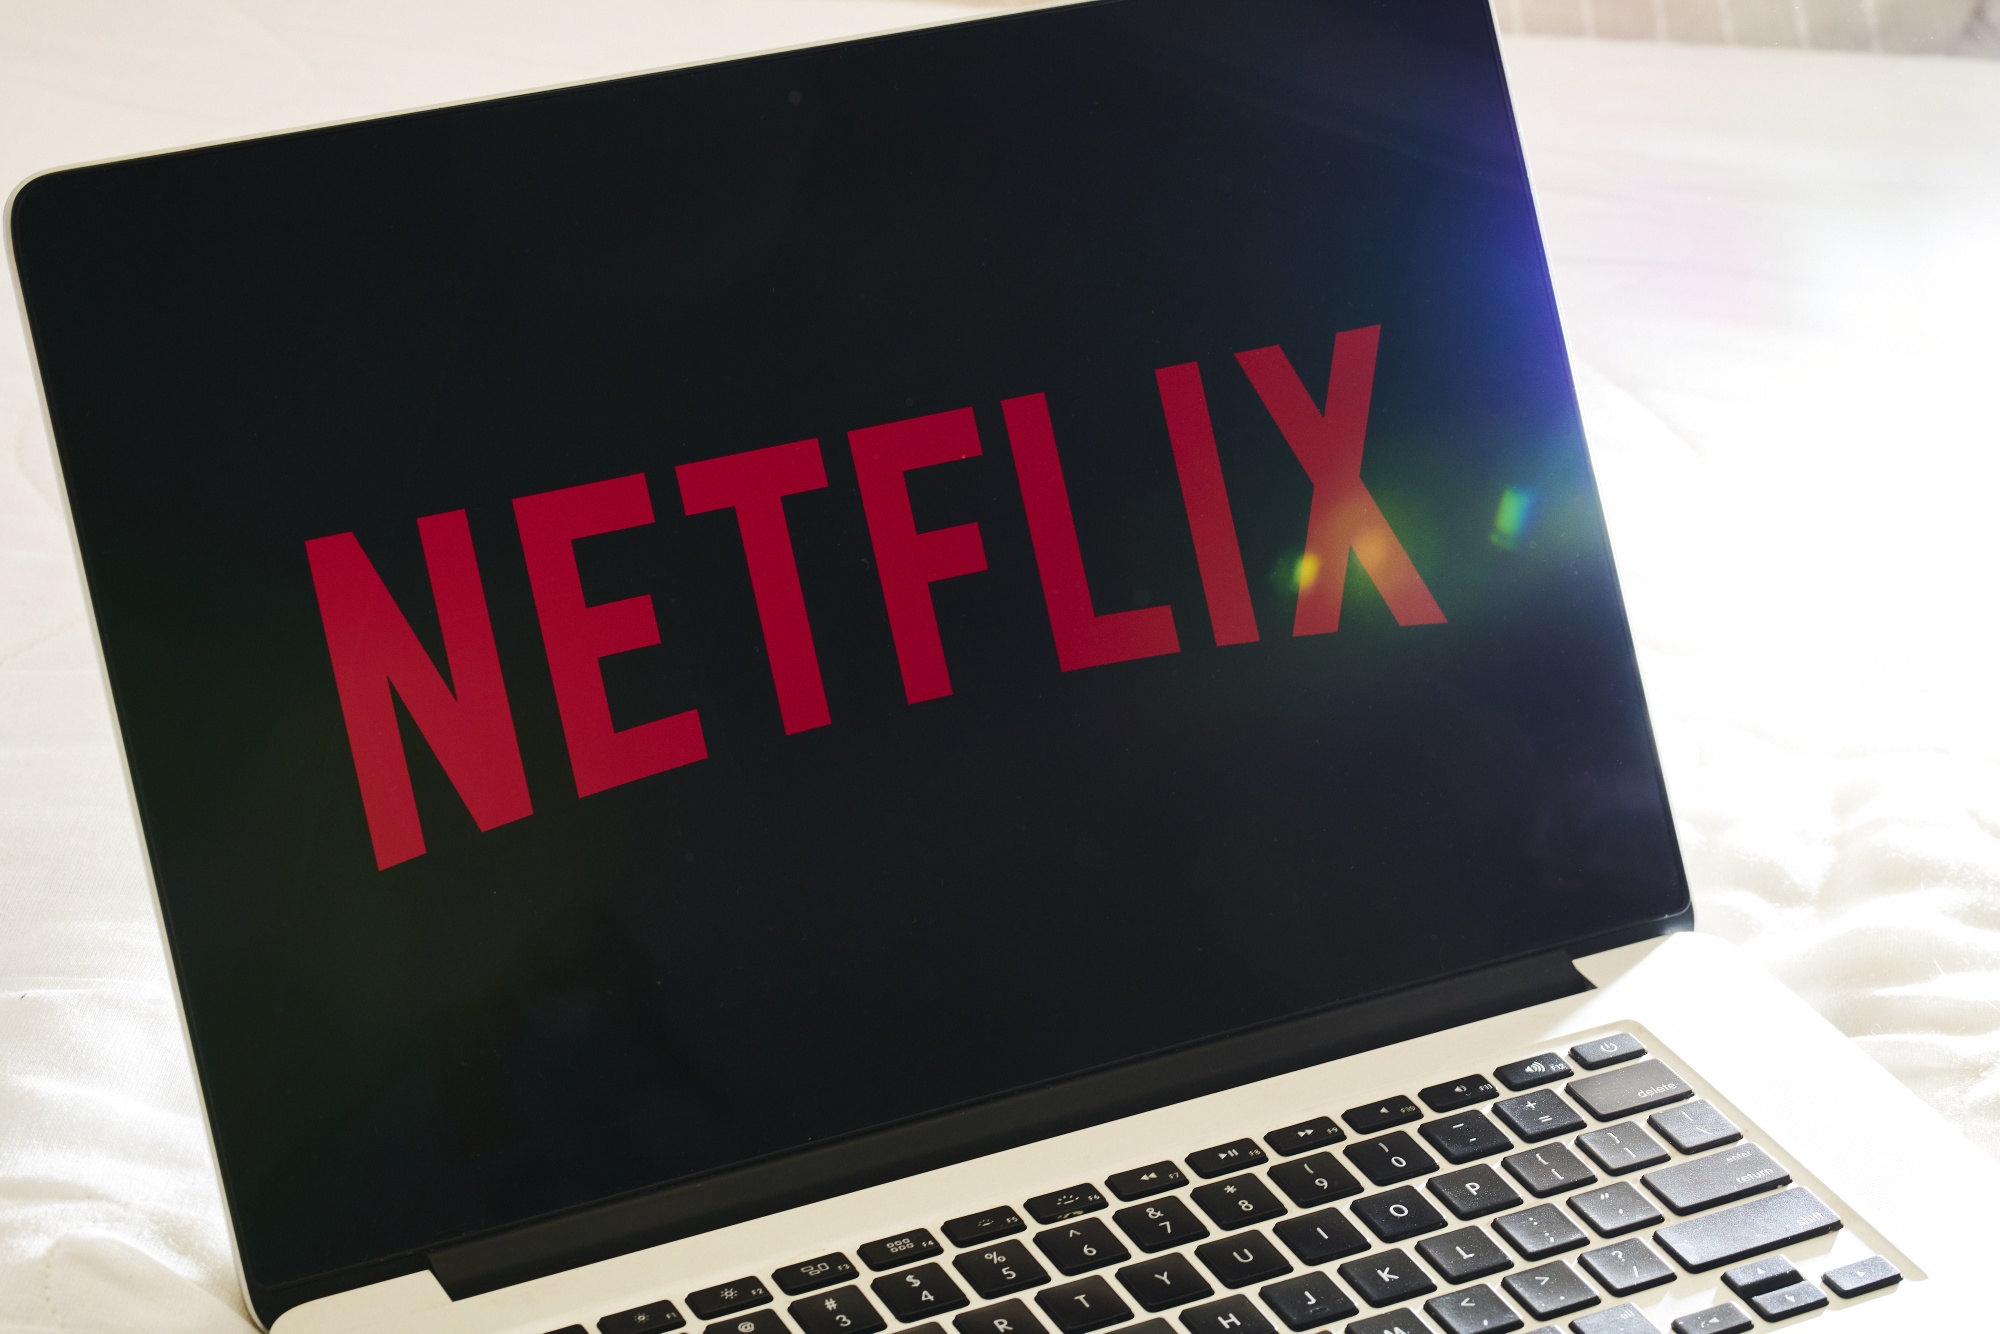 Netflix pauses all projects, acquisitions in Russia - source